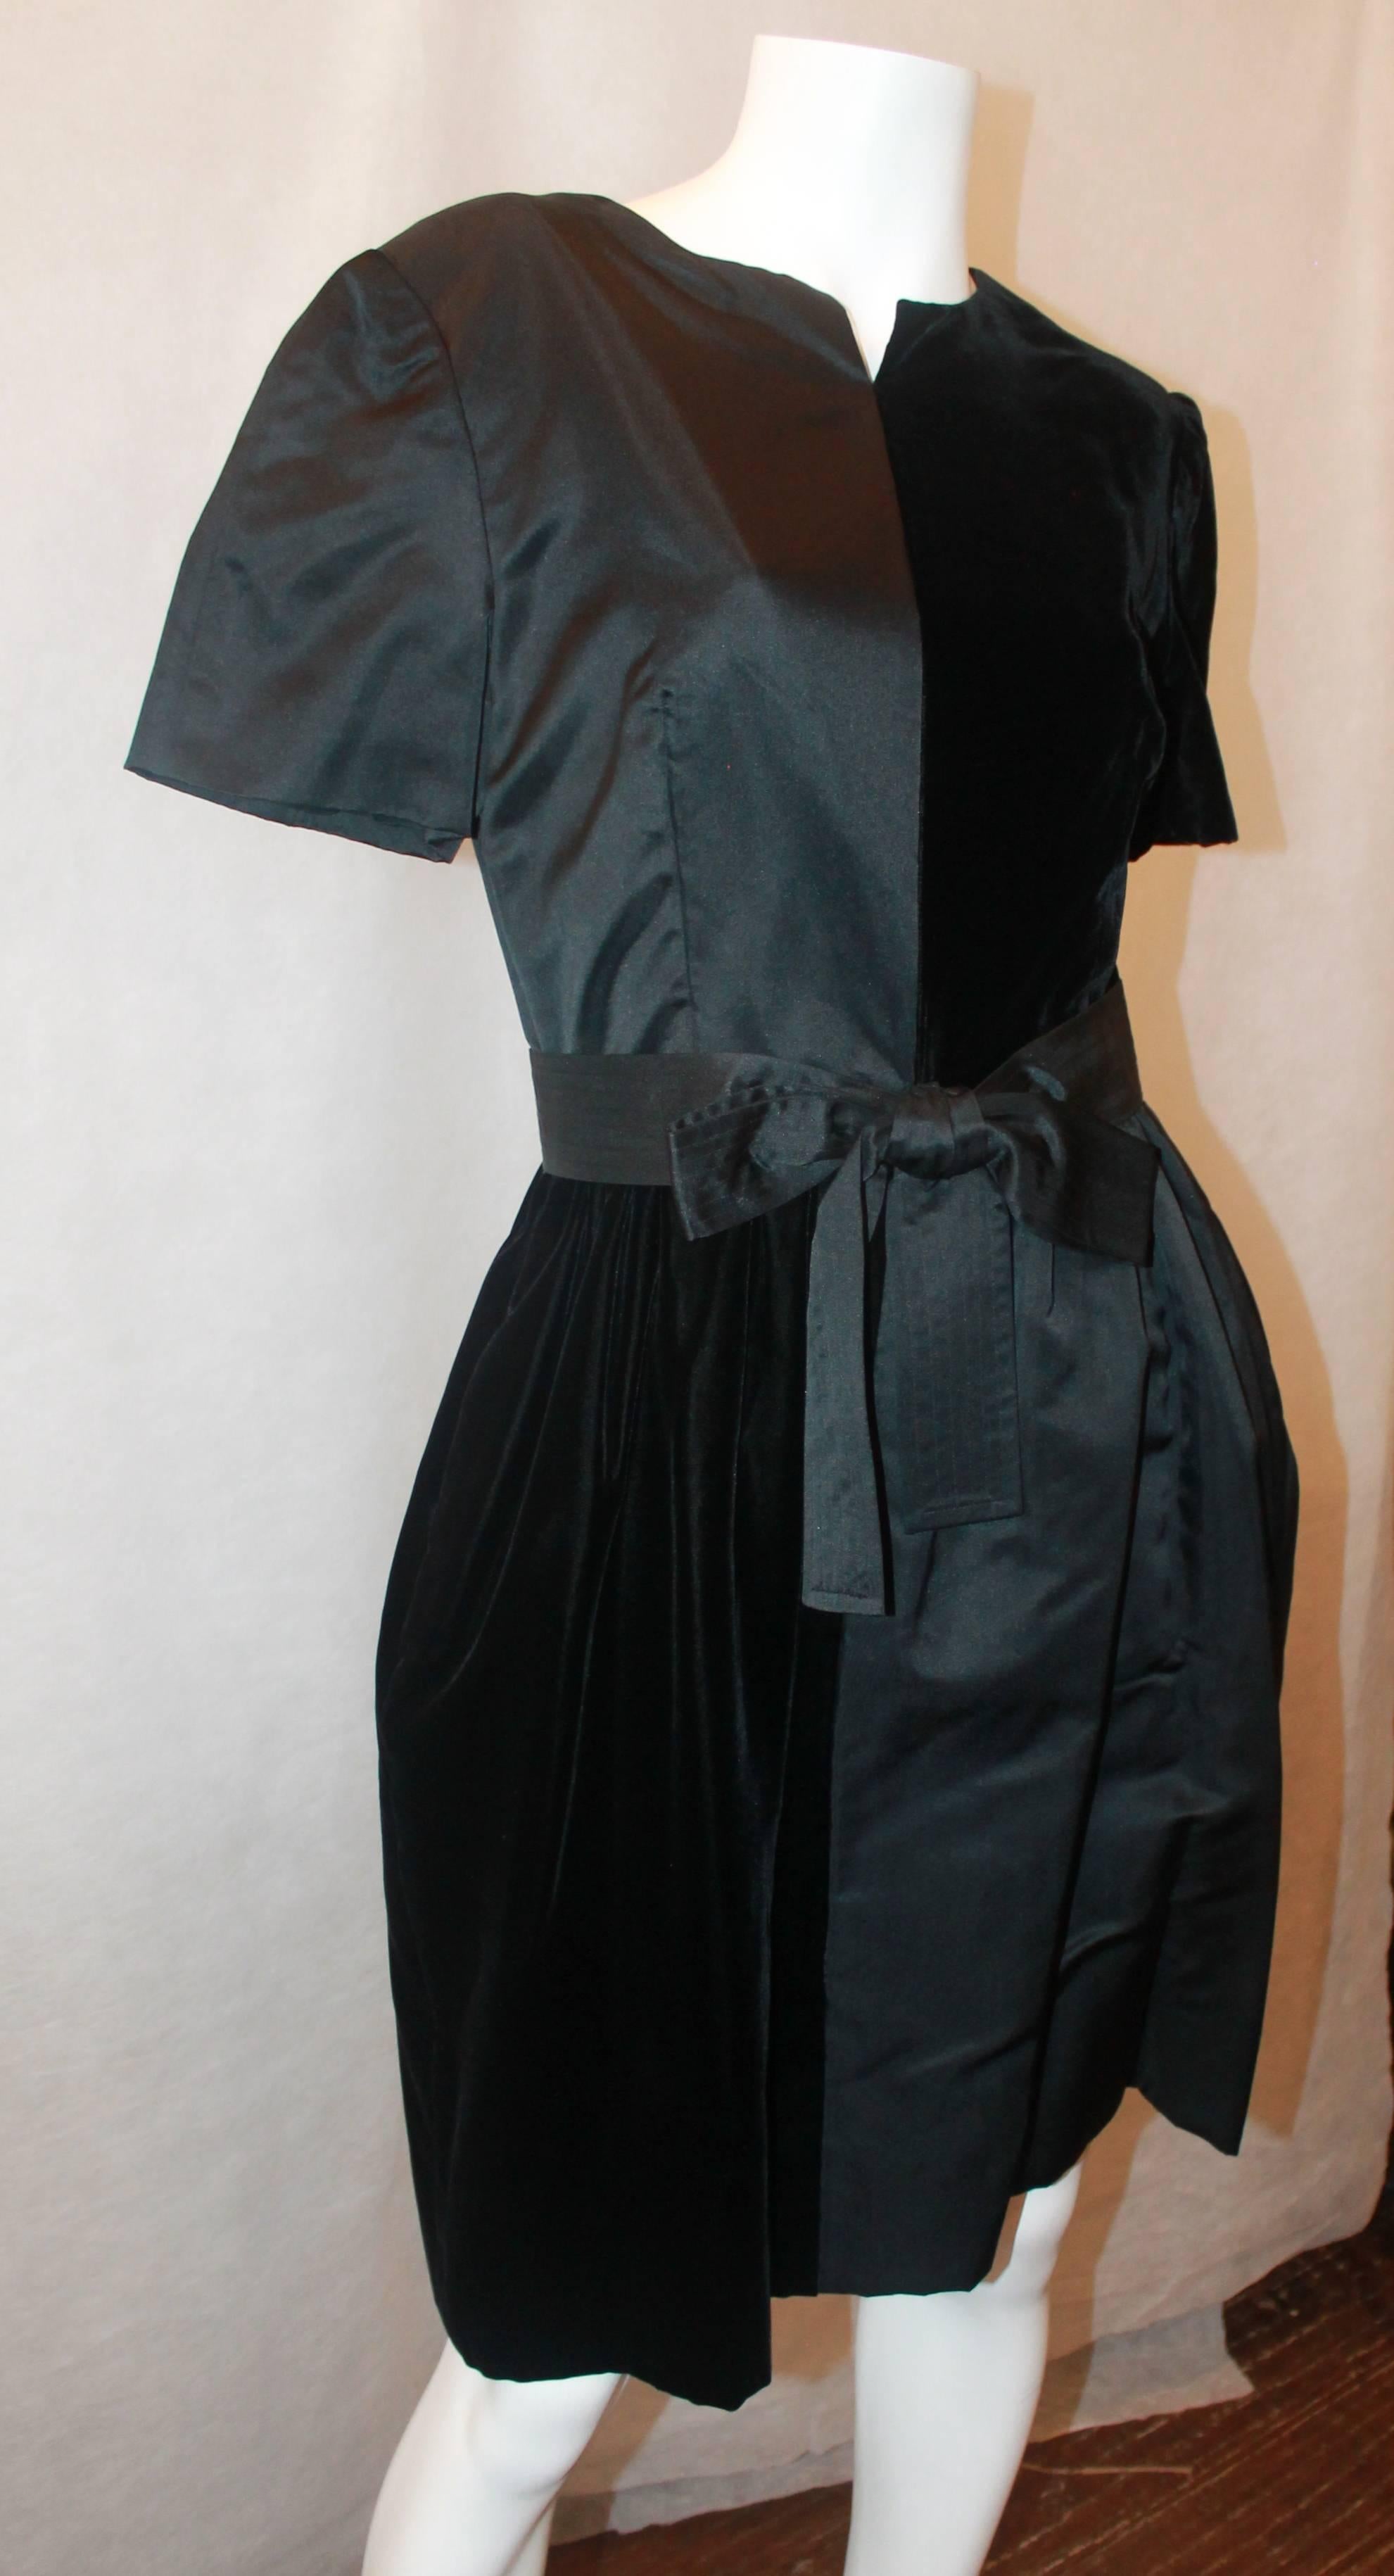 Bills Blass 1970's Vintage Black Velvet & Satin Short Sleeve Dress - 8. This dress is in excellent vintage condition and have a small slit in the front. The dress has 2 side pockets and a larger front bow in satin. The front looks like a large